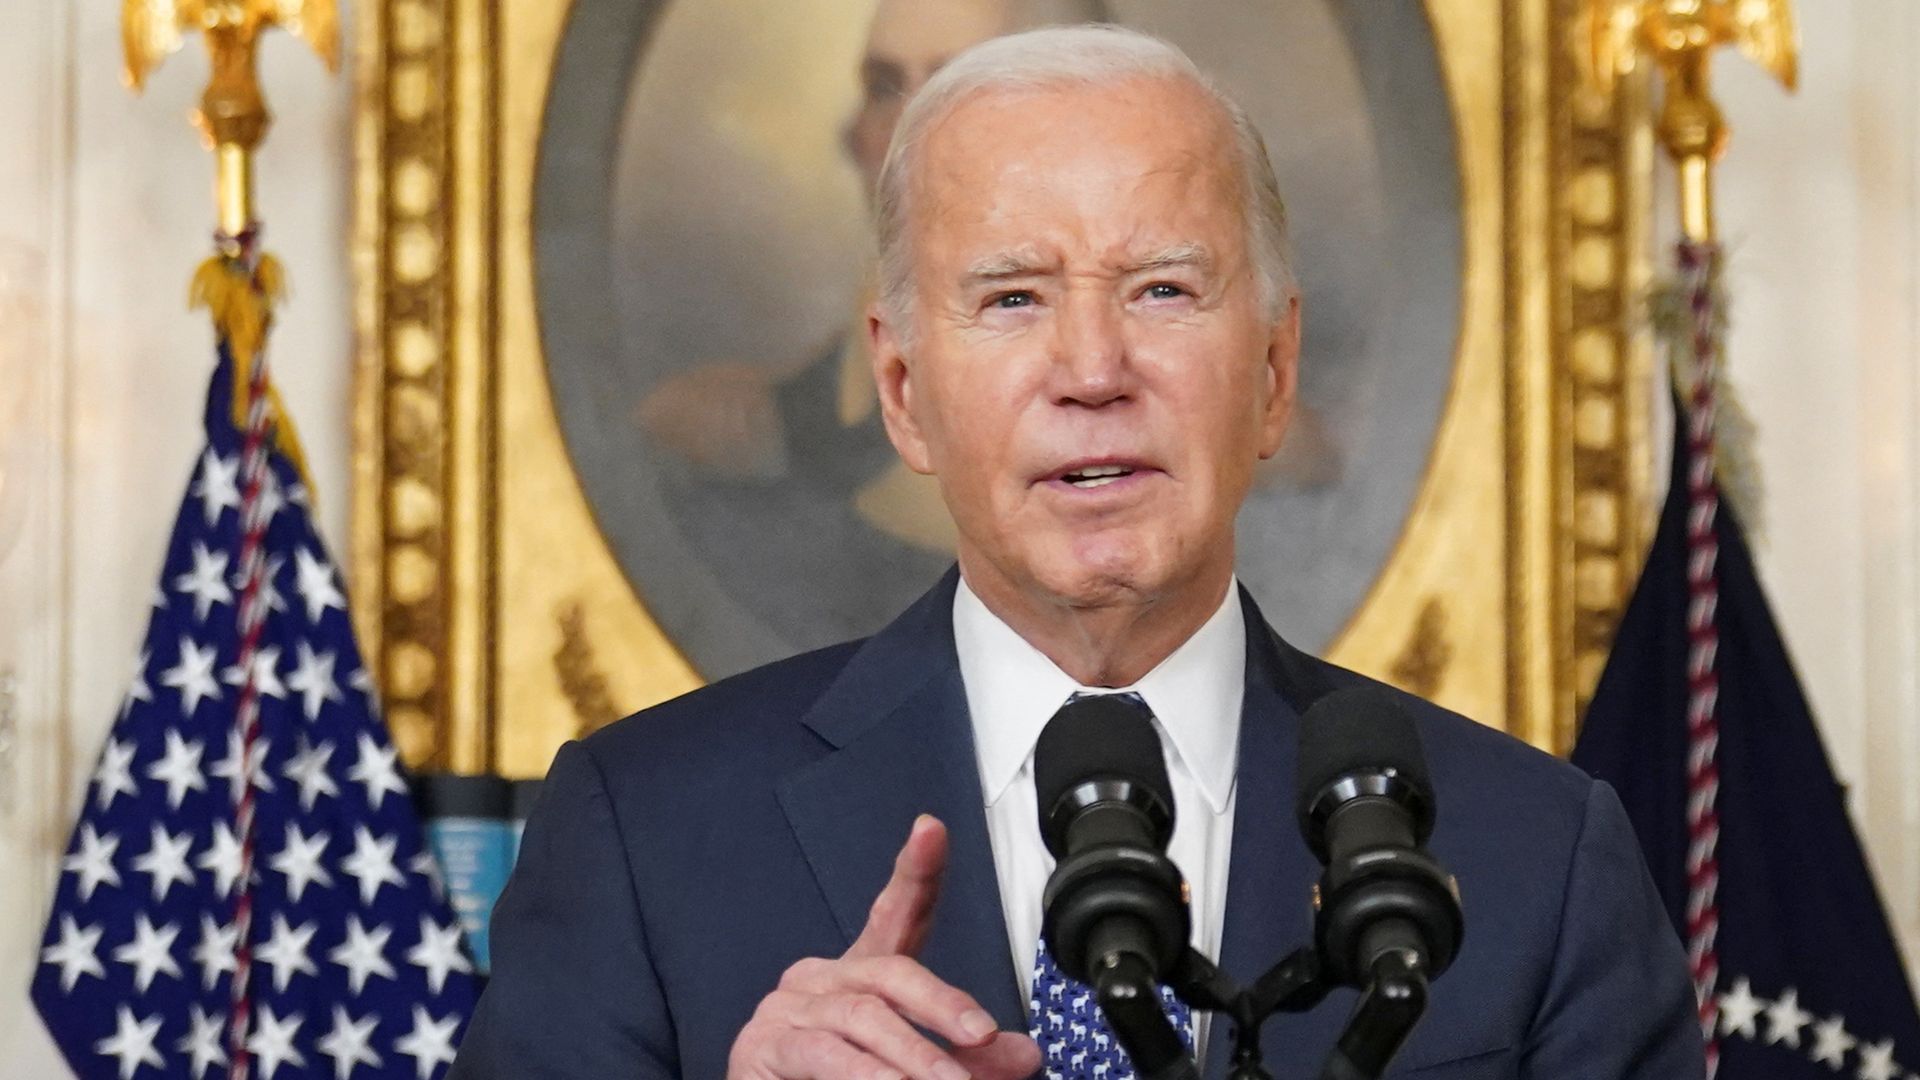 President Joe Biden answered questions about his memory following the release of a report into his handling of classified documents.